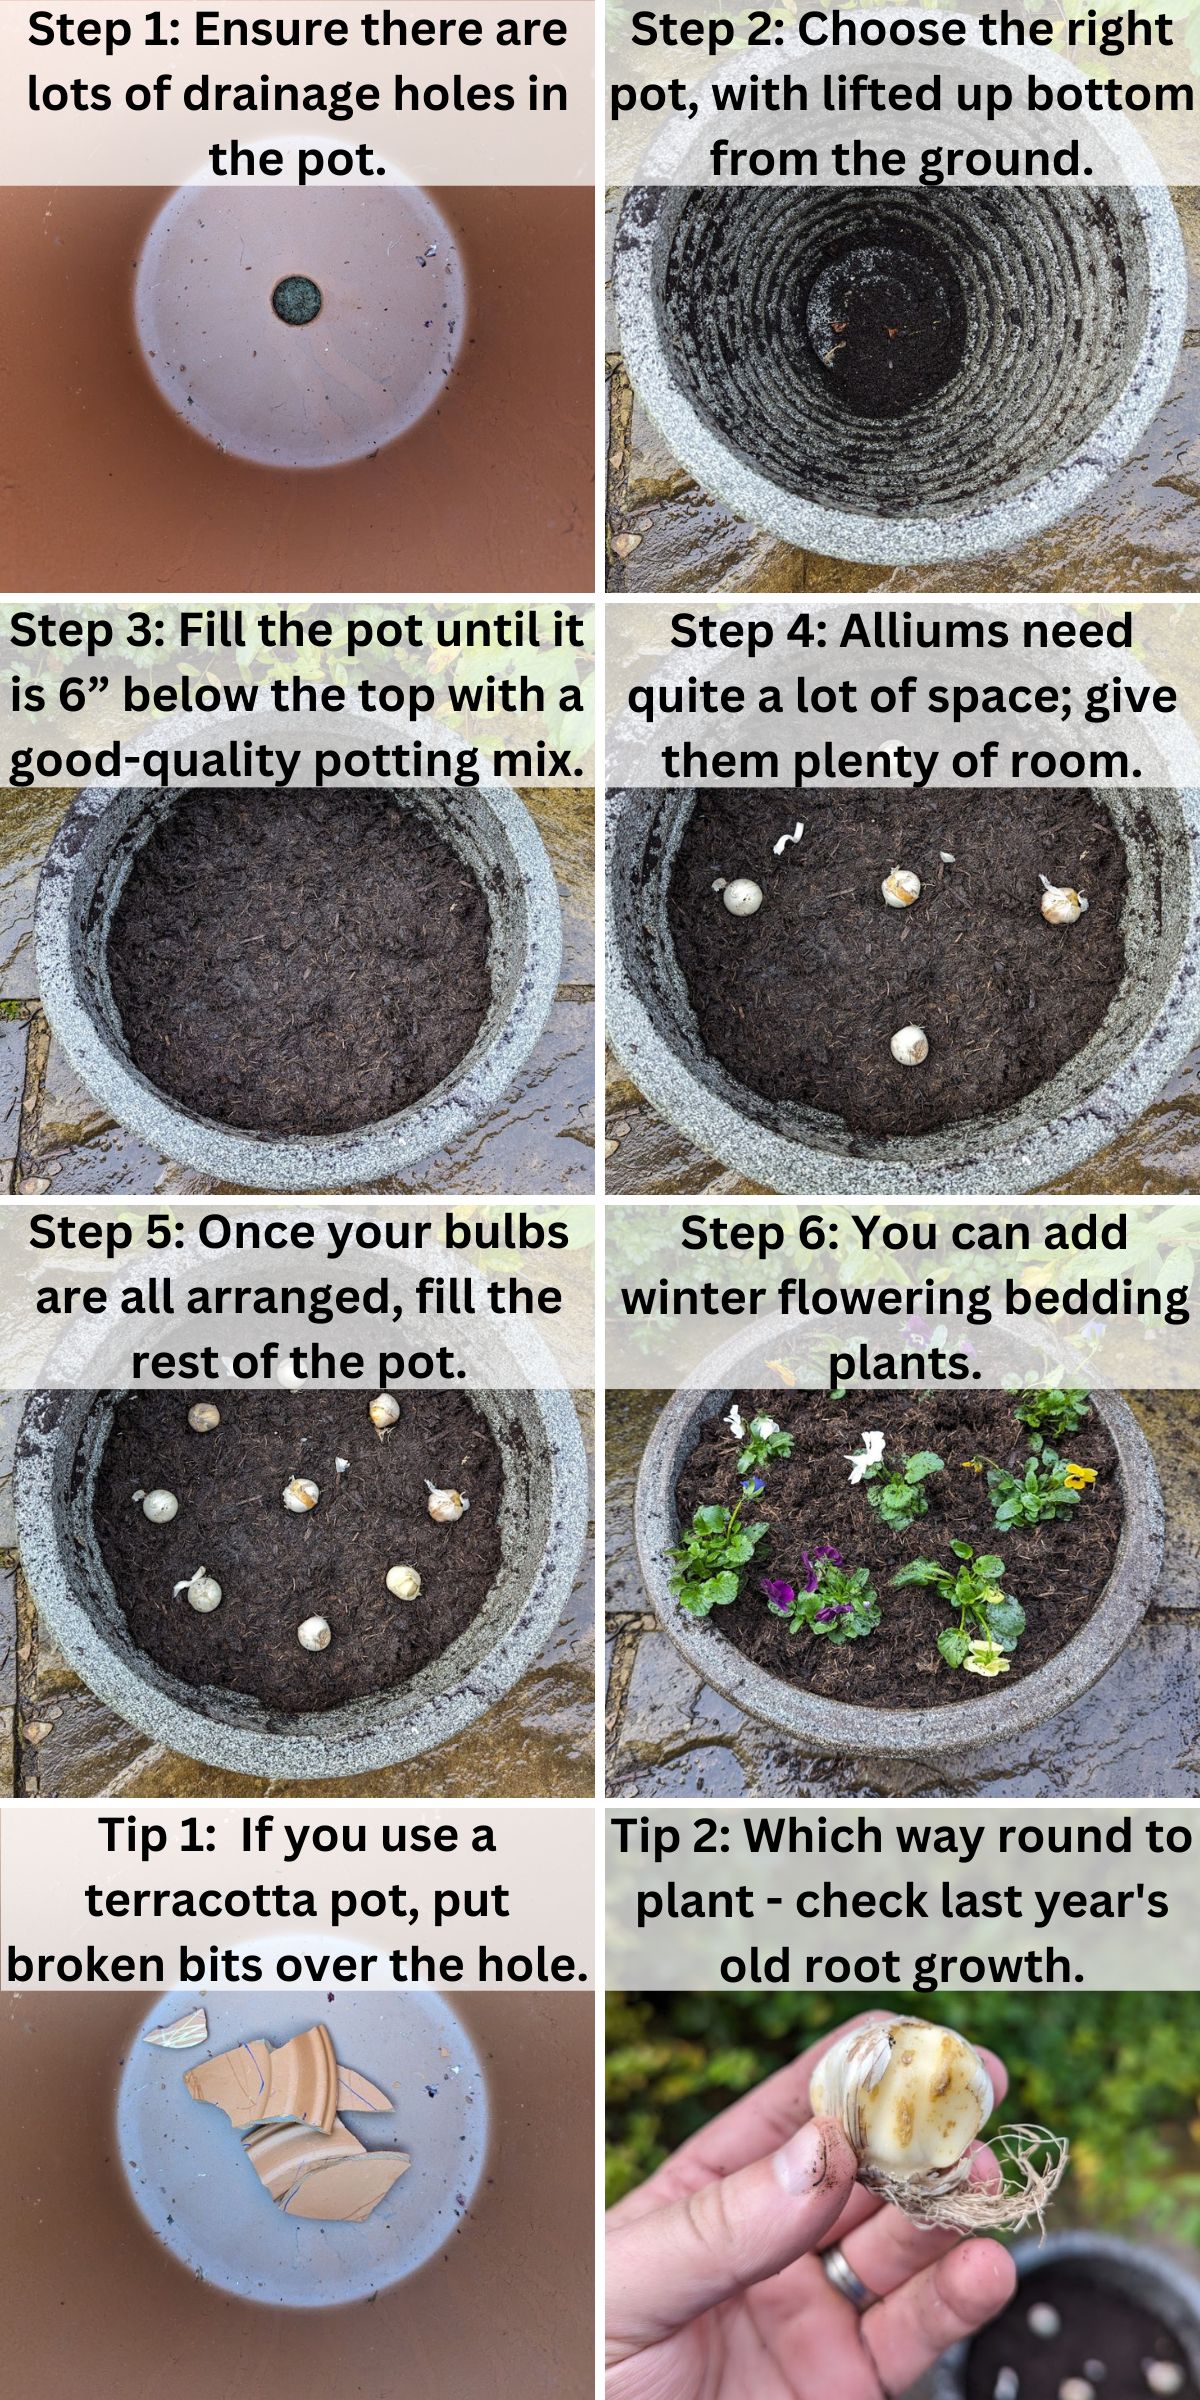 How To Plant Alliums In Pots 